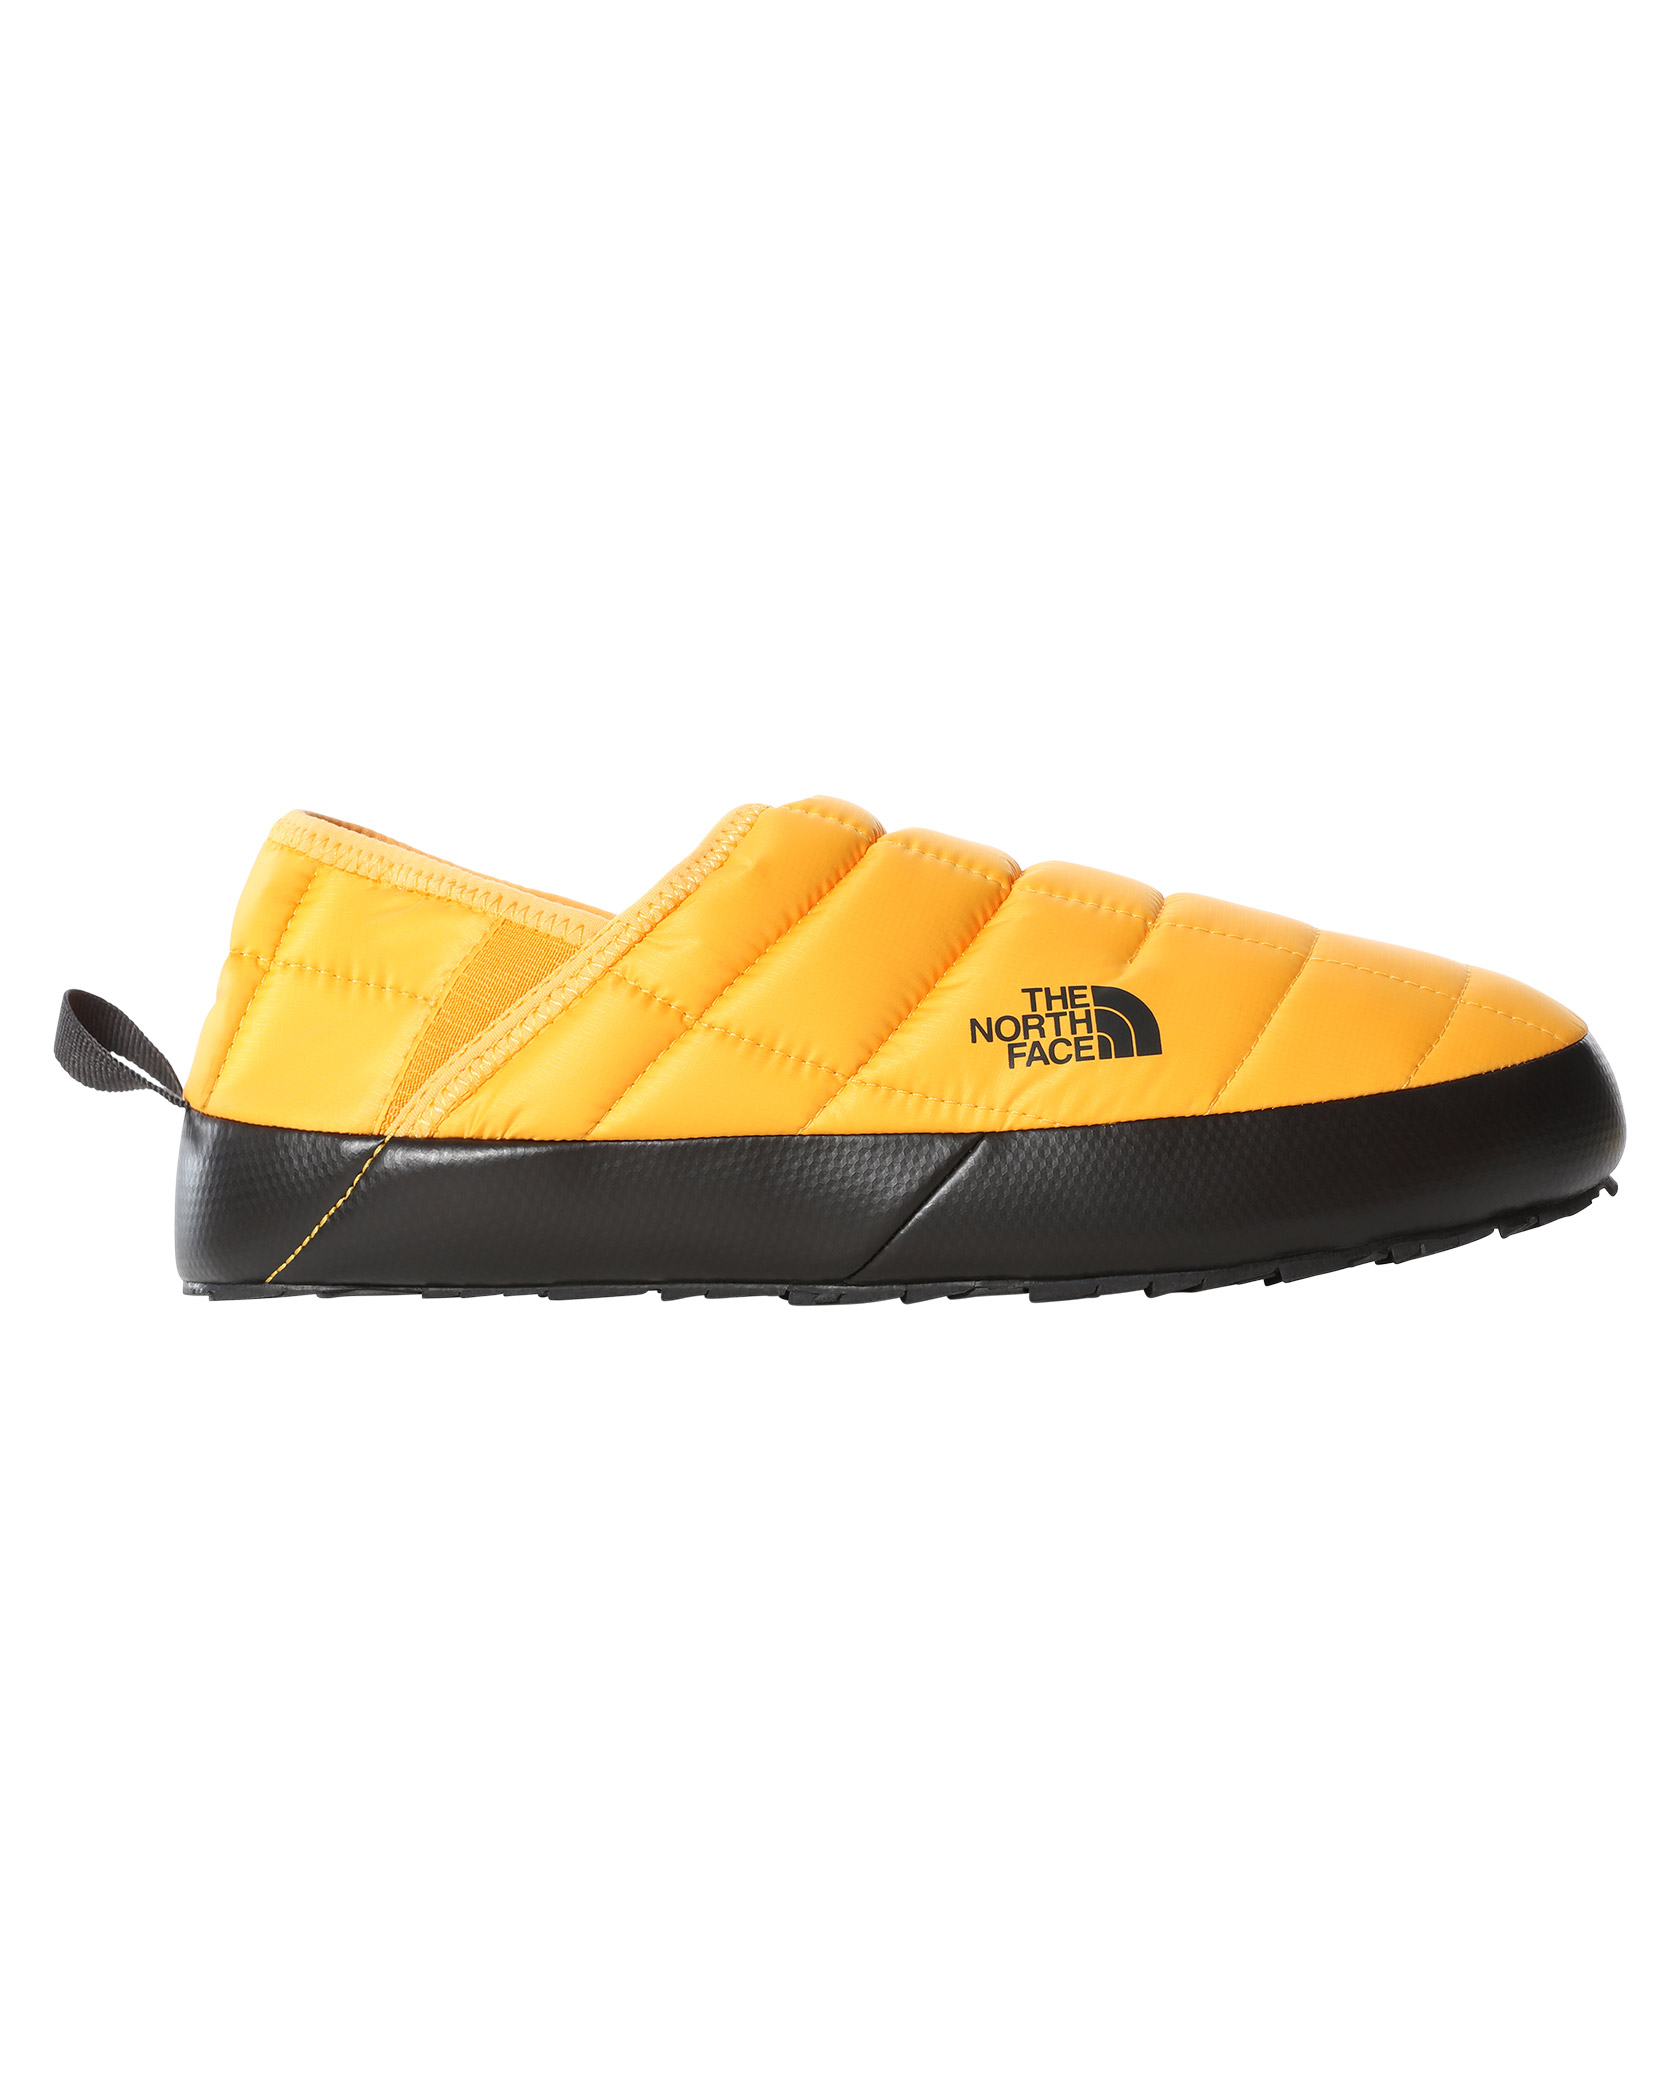 The North Face Thermoball Traction Mule V M Summit Gold/TNF Black (Storlek 12 US)